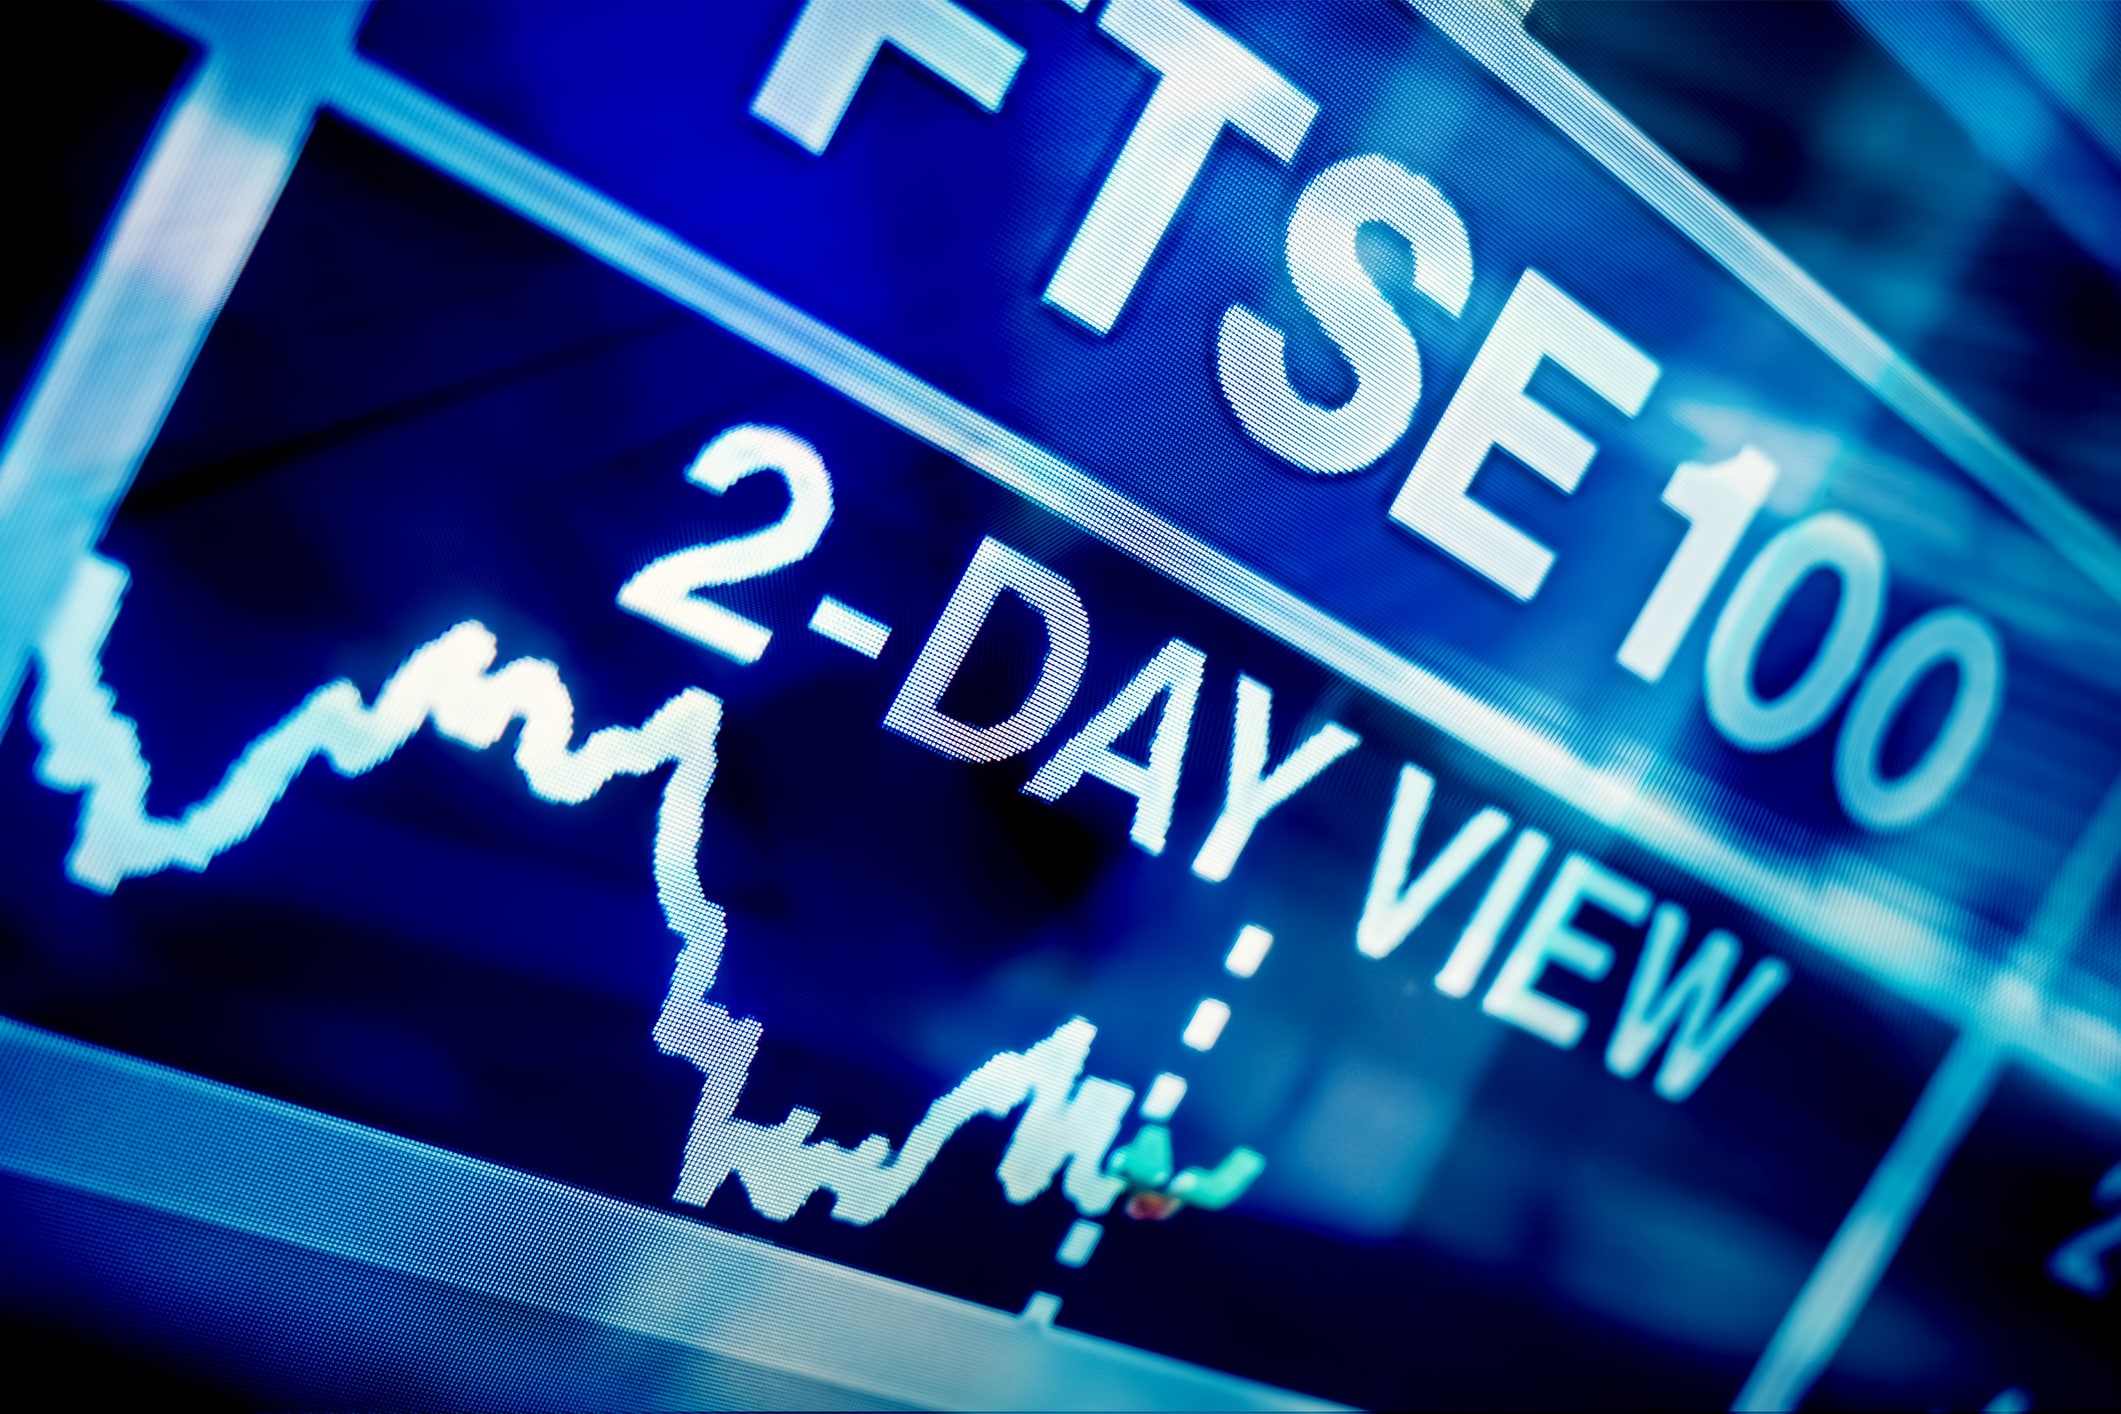 The FTSE 100 with chart line shown on a screen closeup